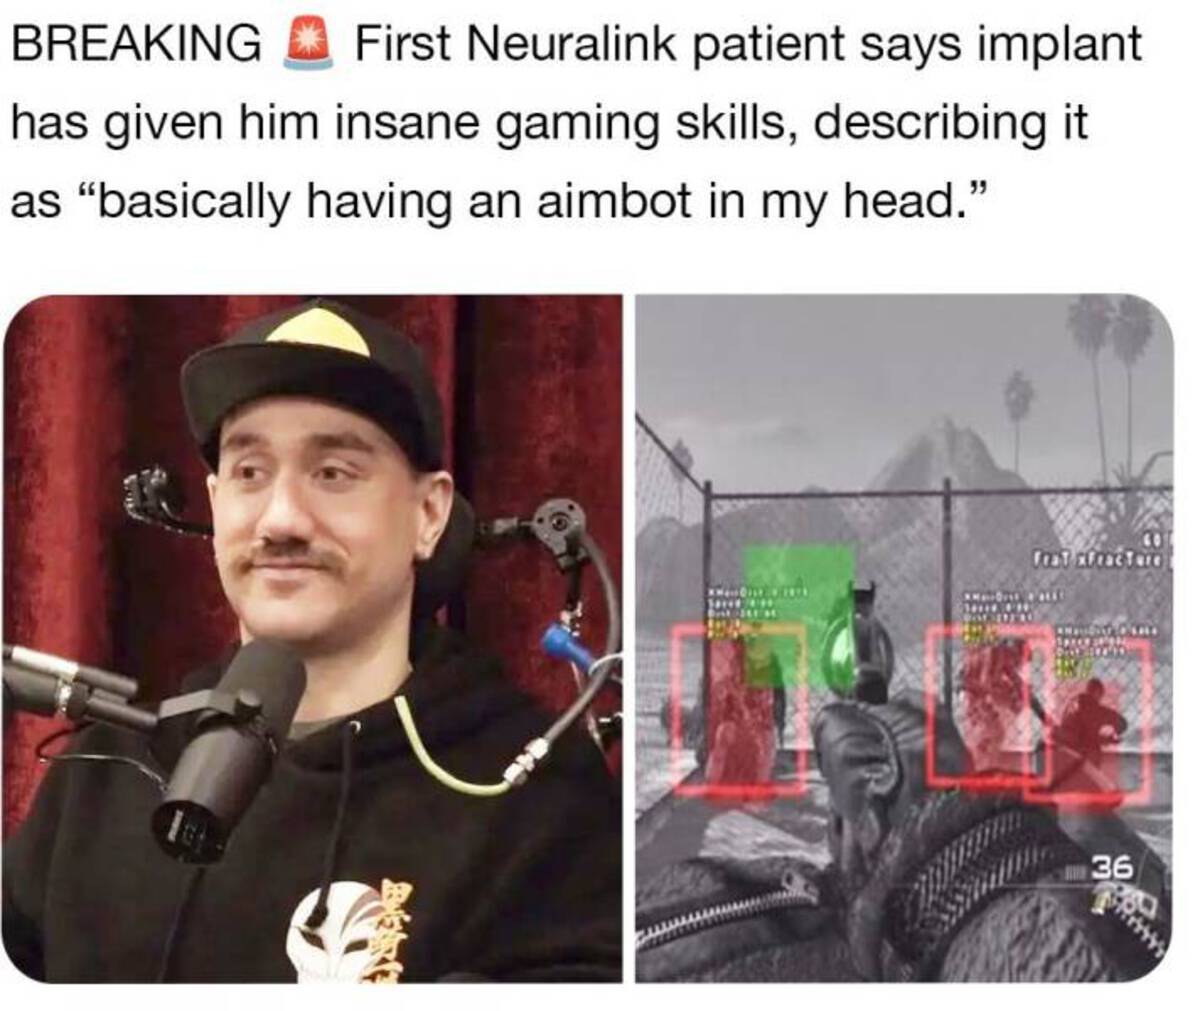 noland arbaugh jre - Breaking First Neuralink patient says implant has given him insane gaming skills, describing it as "basically having an aimbot in my head." feat a fractare 36